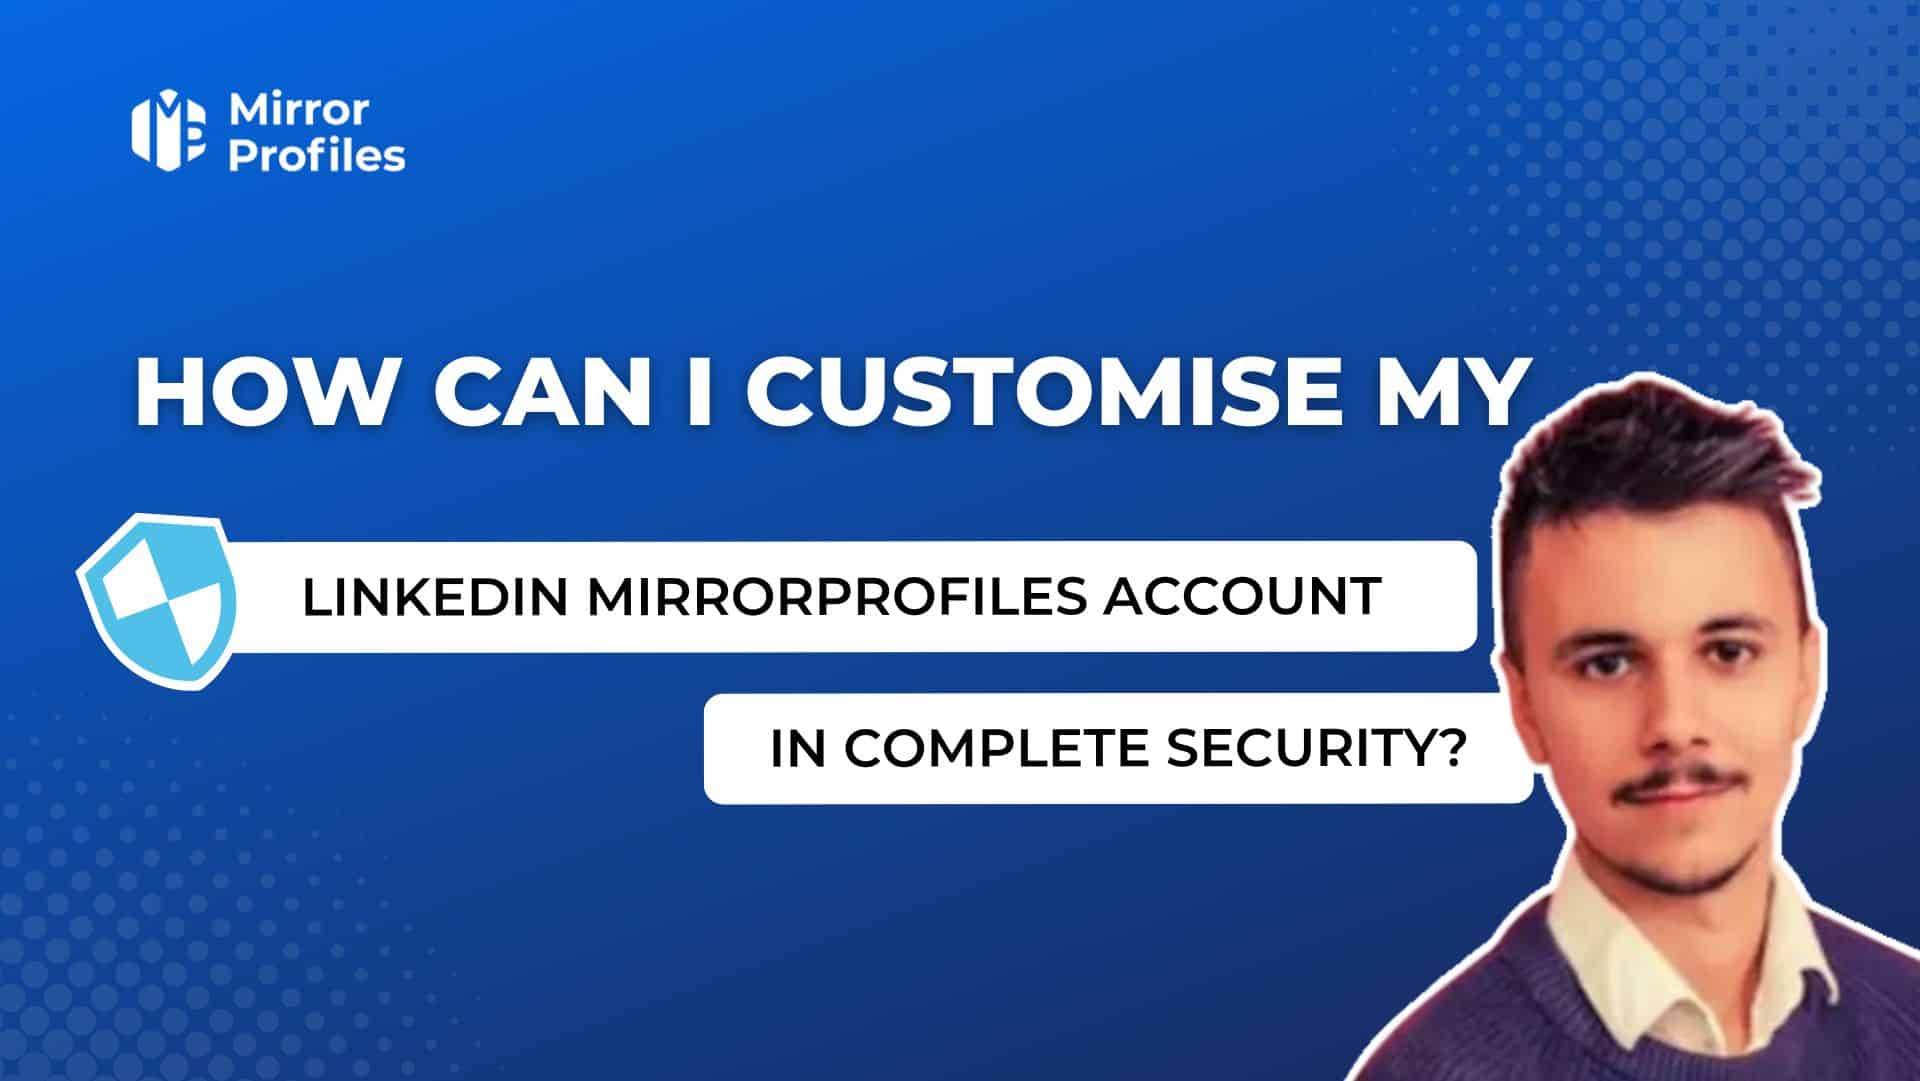 How to customize a Linkedin MirrorProfiles account securely?